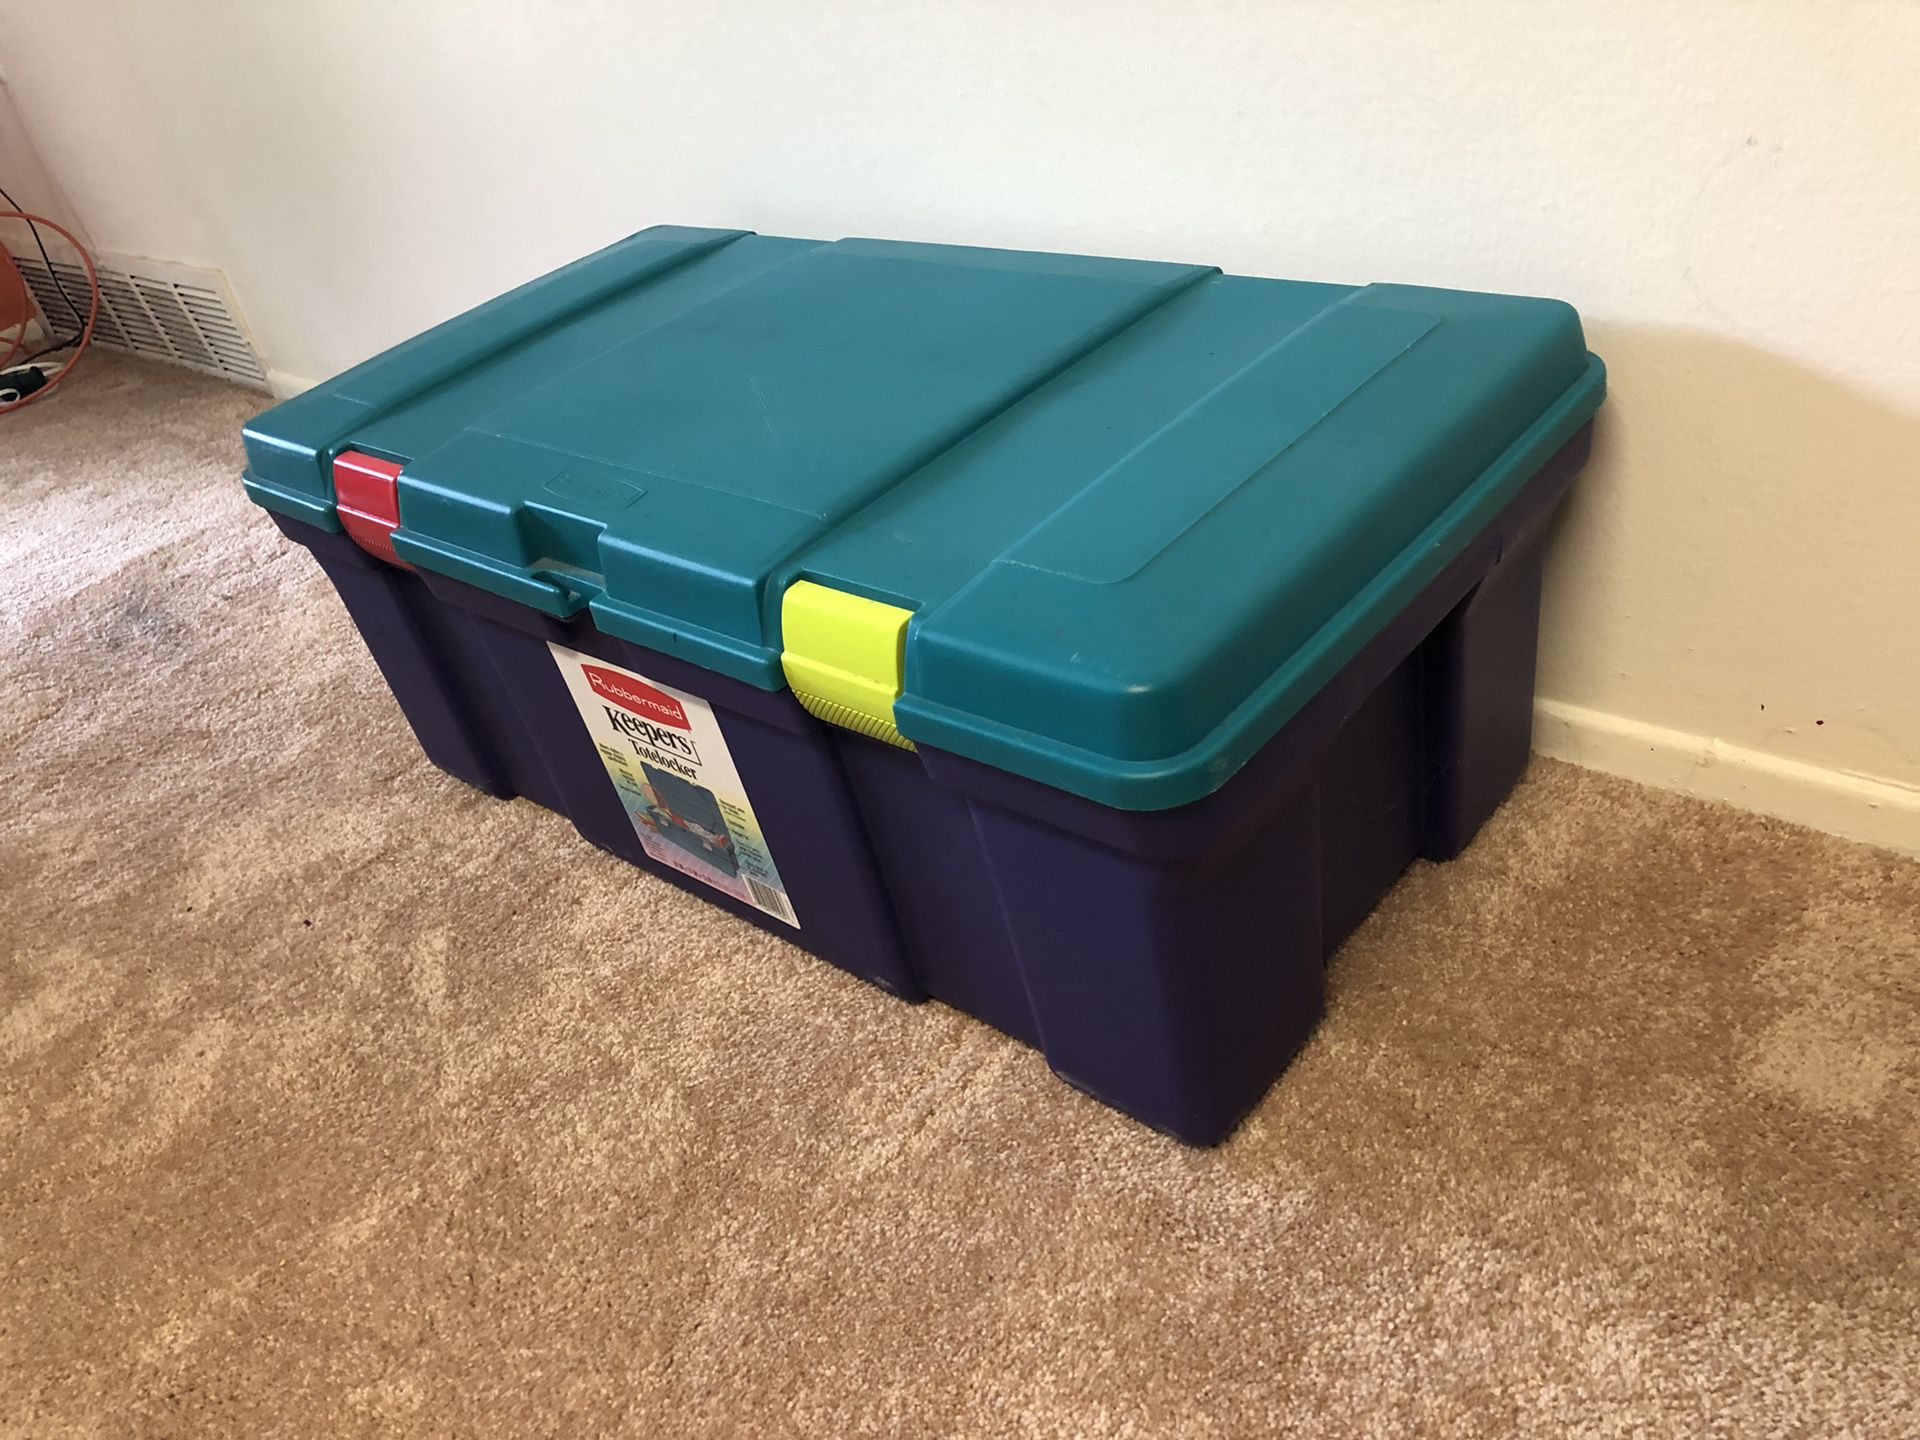 Rubbermaid Upright Storage Container, Holds Gift Wrap Or Can Use For Sports  Equipment, Bats Etc for Sale in Whittier, CA - OfferUp